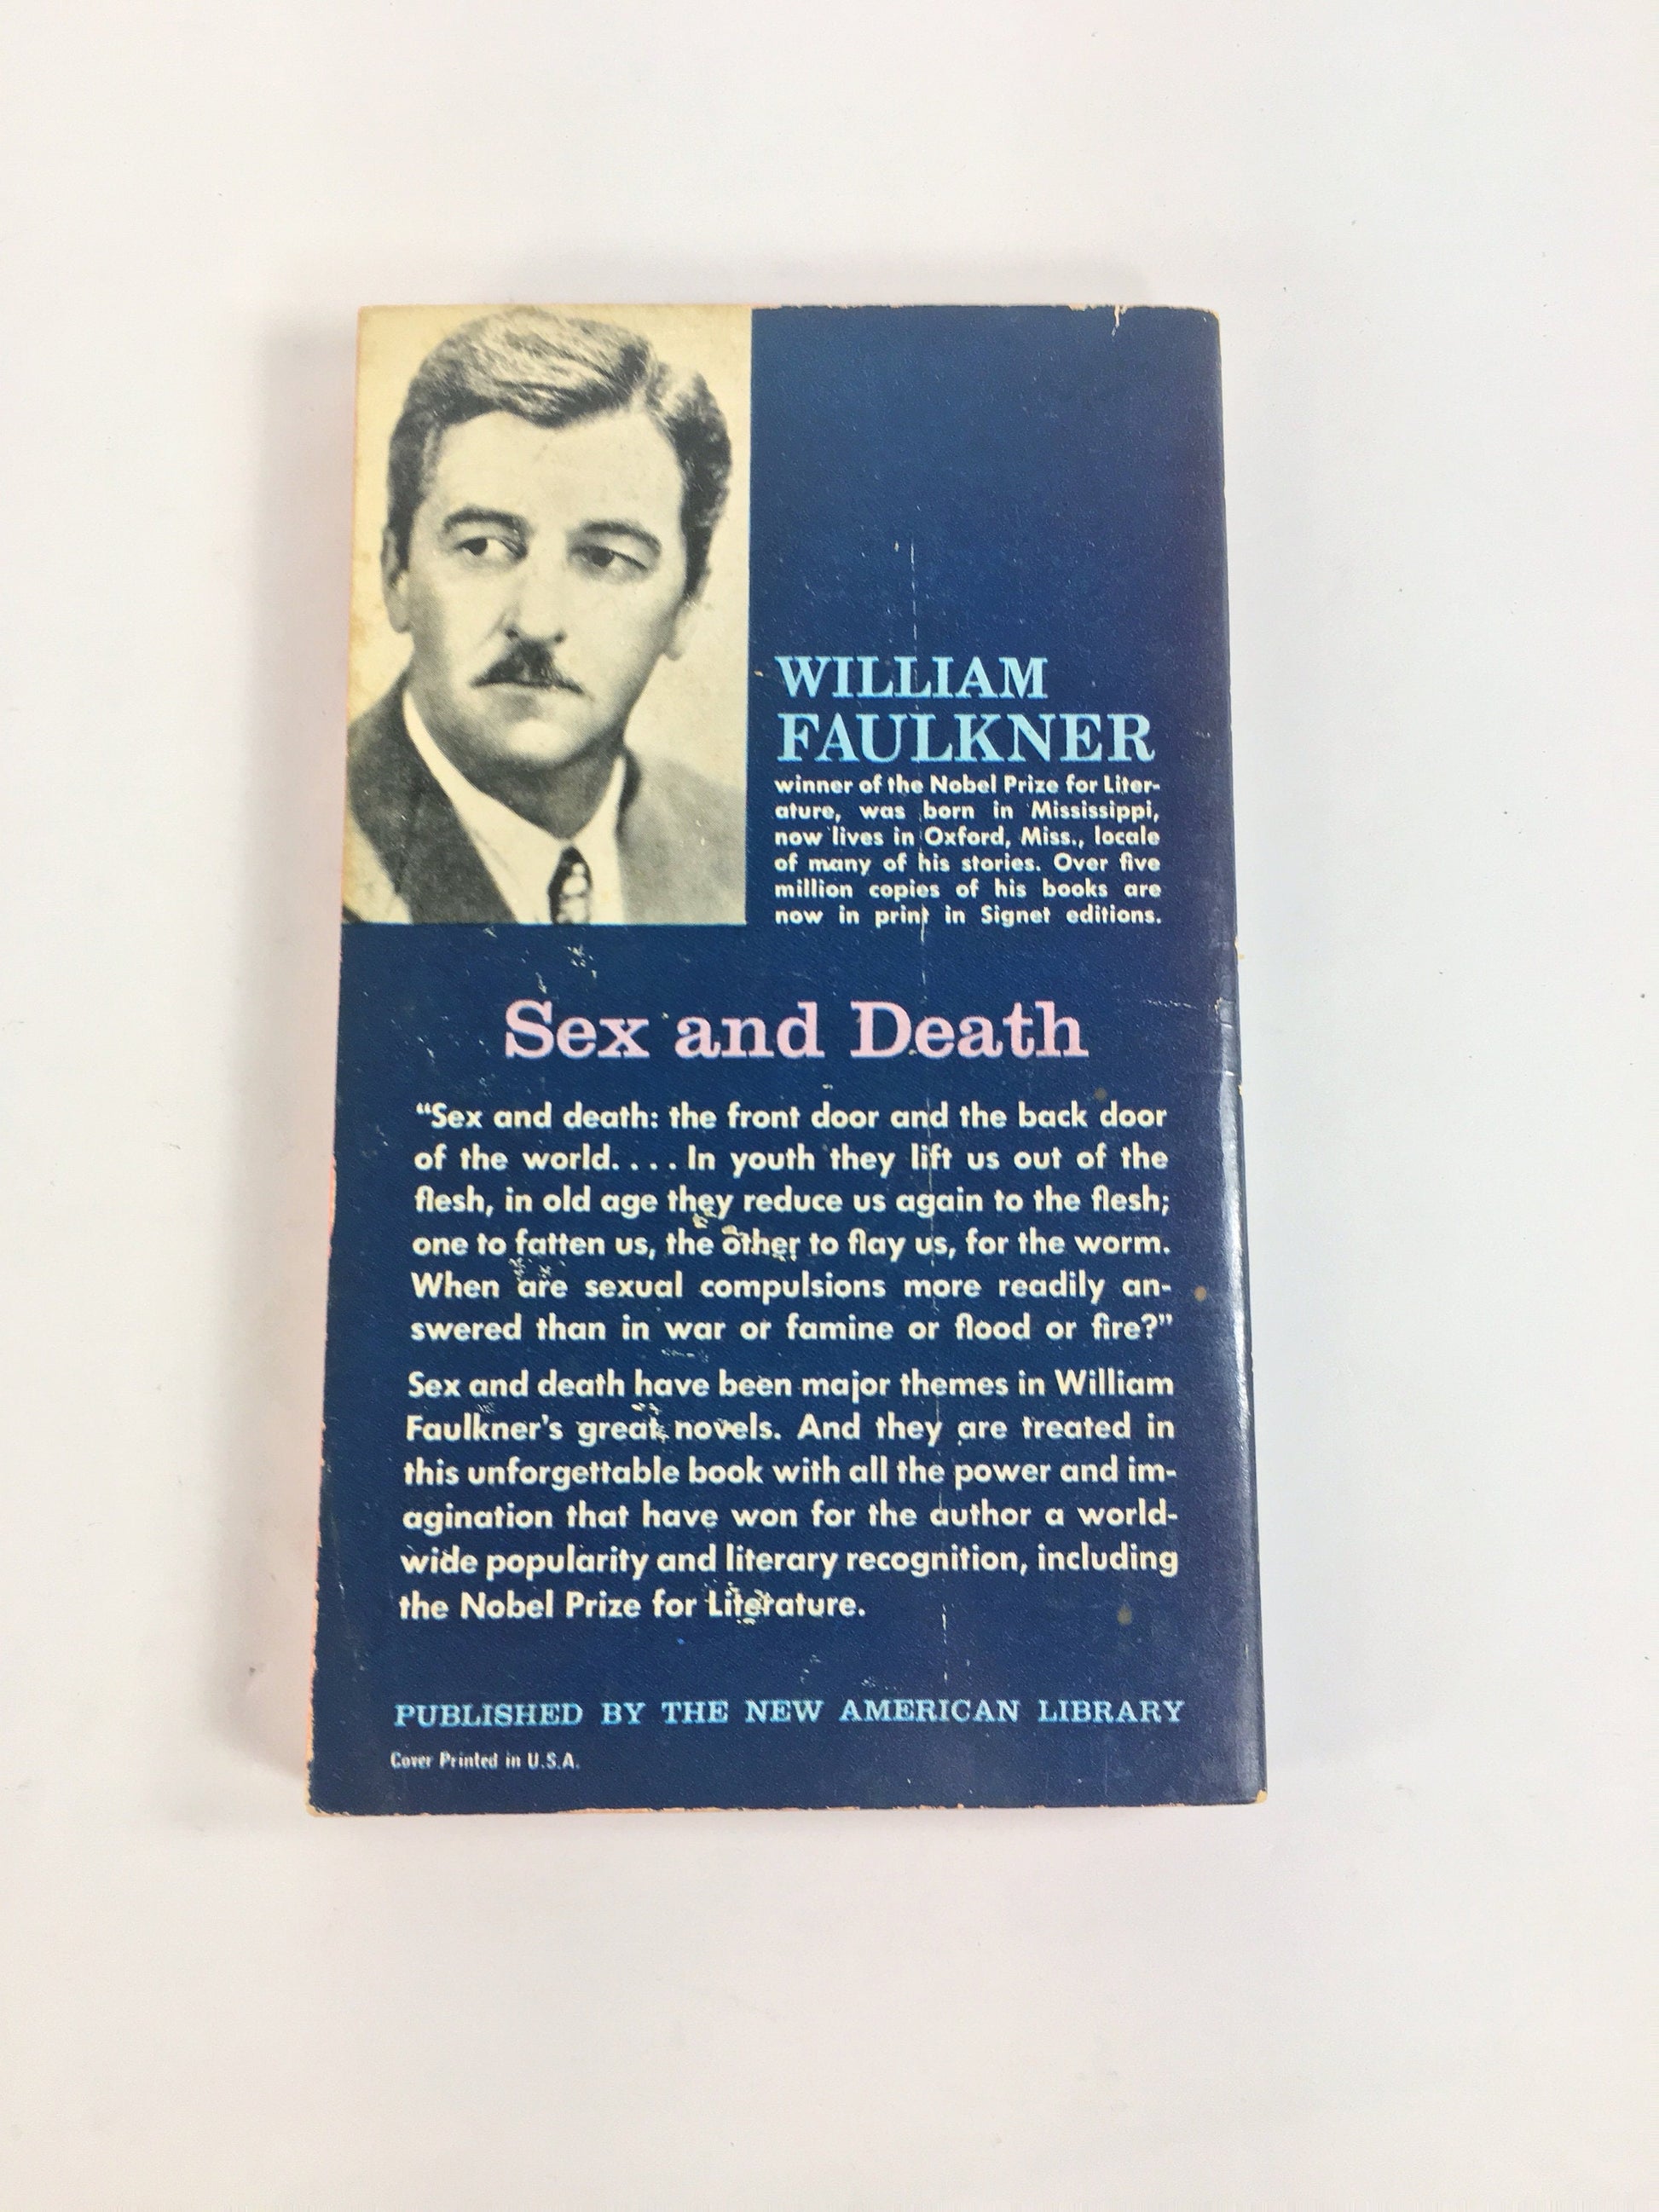 William Faulkner Soldiers' Pay. Vintage Signet paperback book circa 1961. Faulkner’s first novel deals powerfully with lives blighted by war